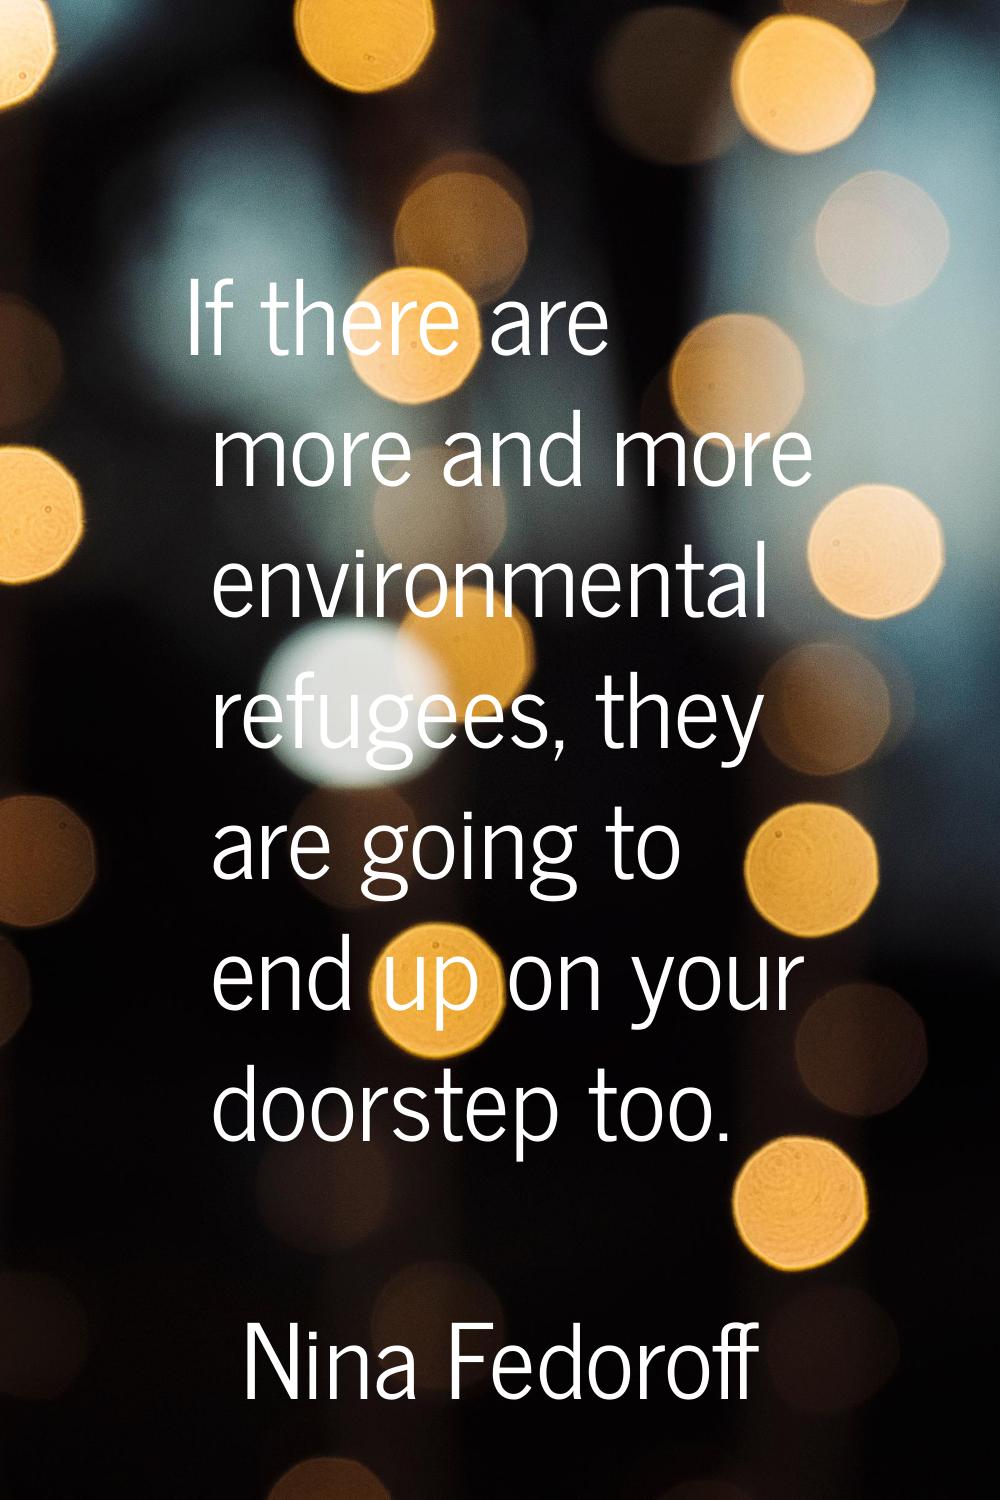 If there are more and more environmental refugees, they are going to end up on your doorstep too.